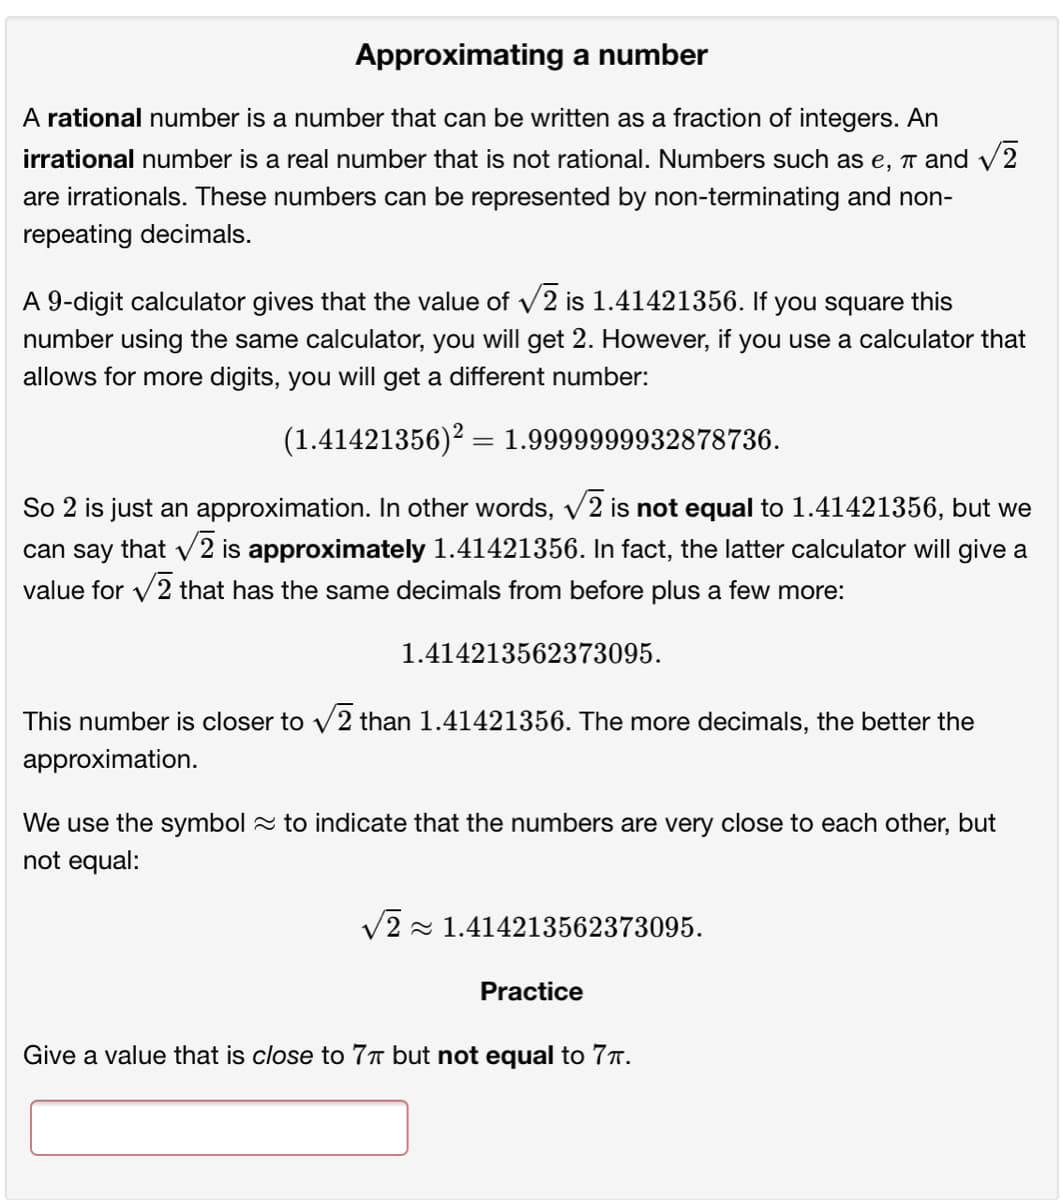 Approximating a number
A rational number is a number that can be written as a fraction of integers. An
irrational number is a real number that is not rational. Numbers such as e, ↑ and V2
are irrationals. These numbers can be represented by non-terminating and non-
repeating decimals.
A 9-digit calculator gives that the value of v2 is 1.41421356. If you square this
number using the same calculator, you will get 2. However, if you use a calculator that
allows for more digits, you will get a different number:
(1.41421356)? = 1.9999999932878736.
So 2 is just an approximation. In other words, v2 is not equal to 1.41421356, but we
can say that v2 is approximately 1.41421356. In fact, the latter calculator will give a
value for v2 that has the same decimals from before plus a few more:
1.414213562373095.
This number is closer to v2 than 1.41421356. The more decimals, the better the
approximation.
We use the symbol 2 to indicate that the numbers are very close to each other, but
not equal:
V2 - 1.414213562373095.
Practice
Give a value that is close to 77 but not equal to 7T.
